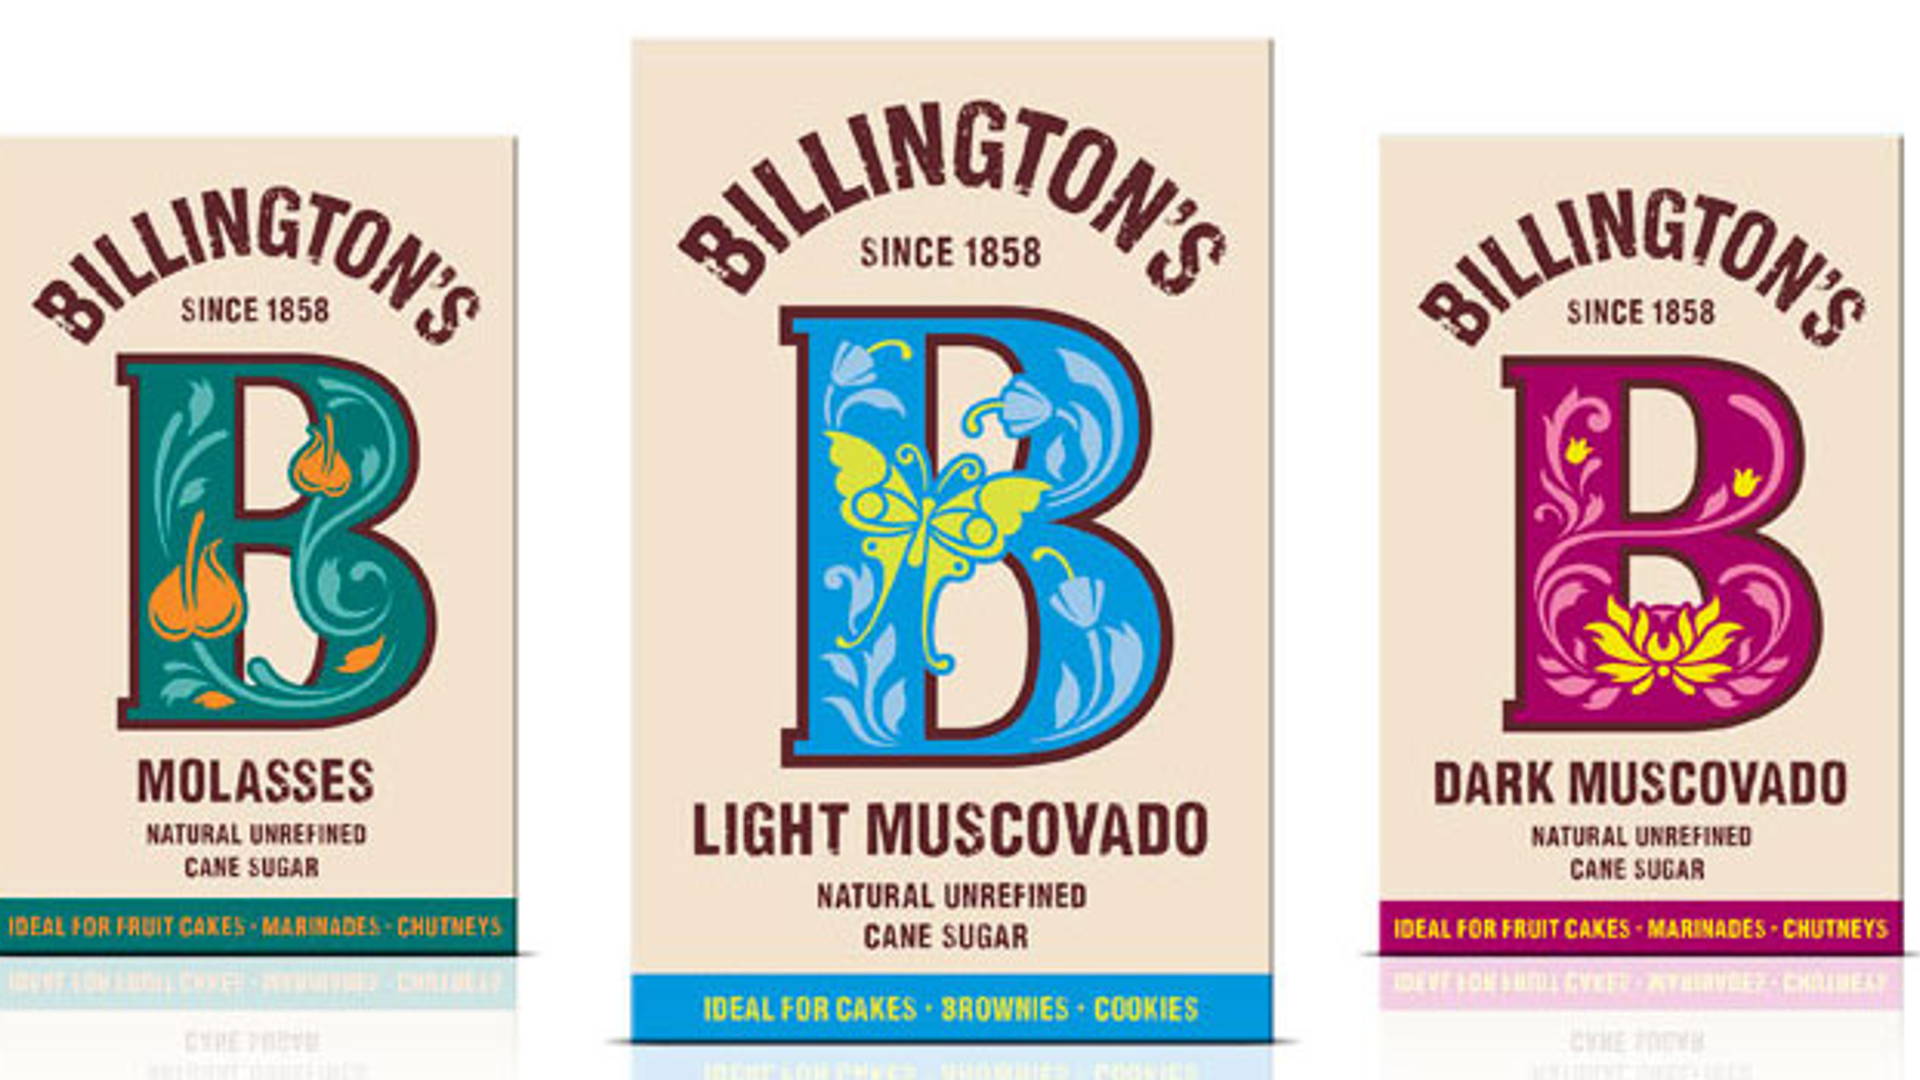 Featured image for Billington's Sugar Before & After